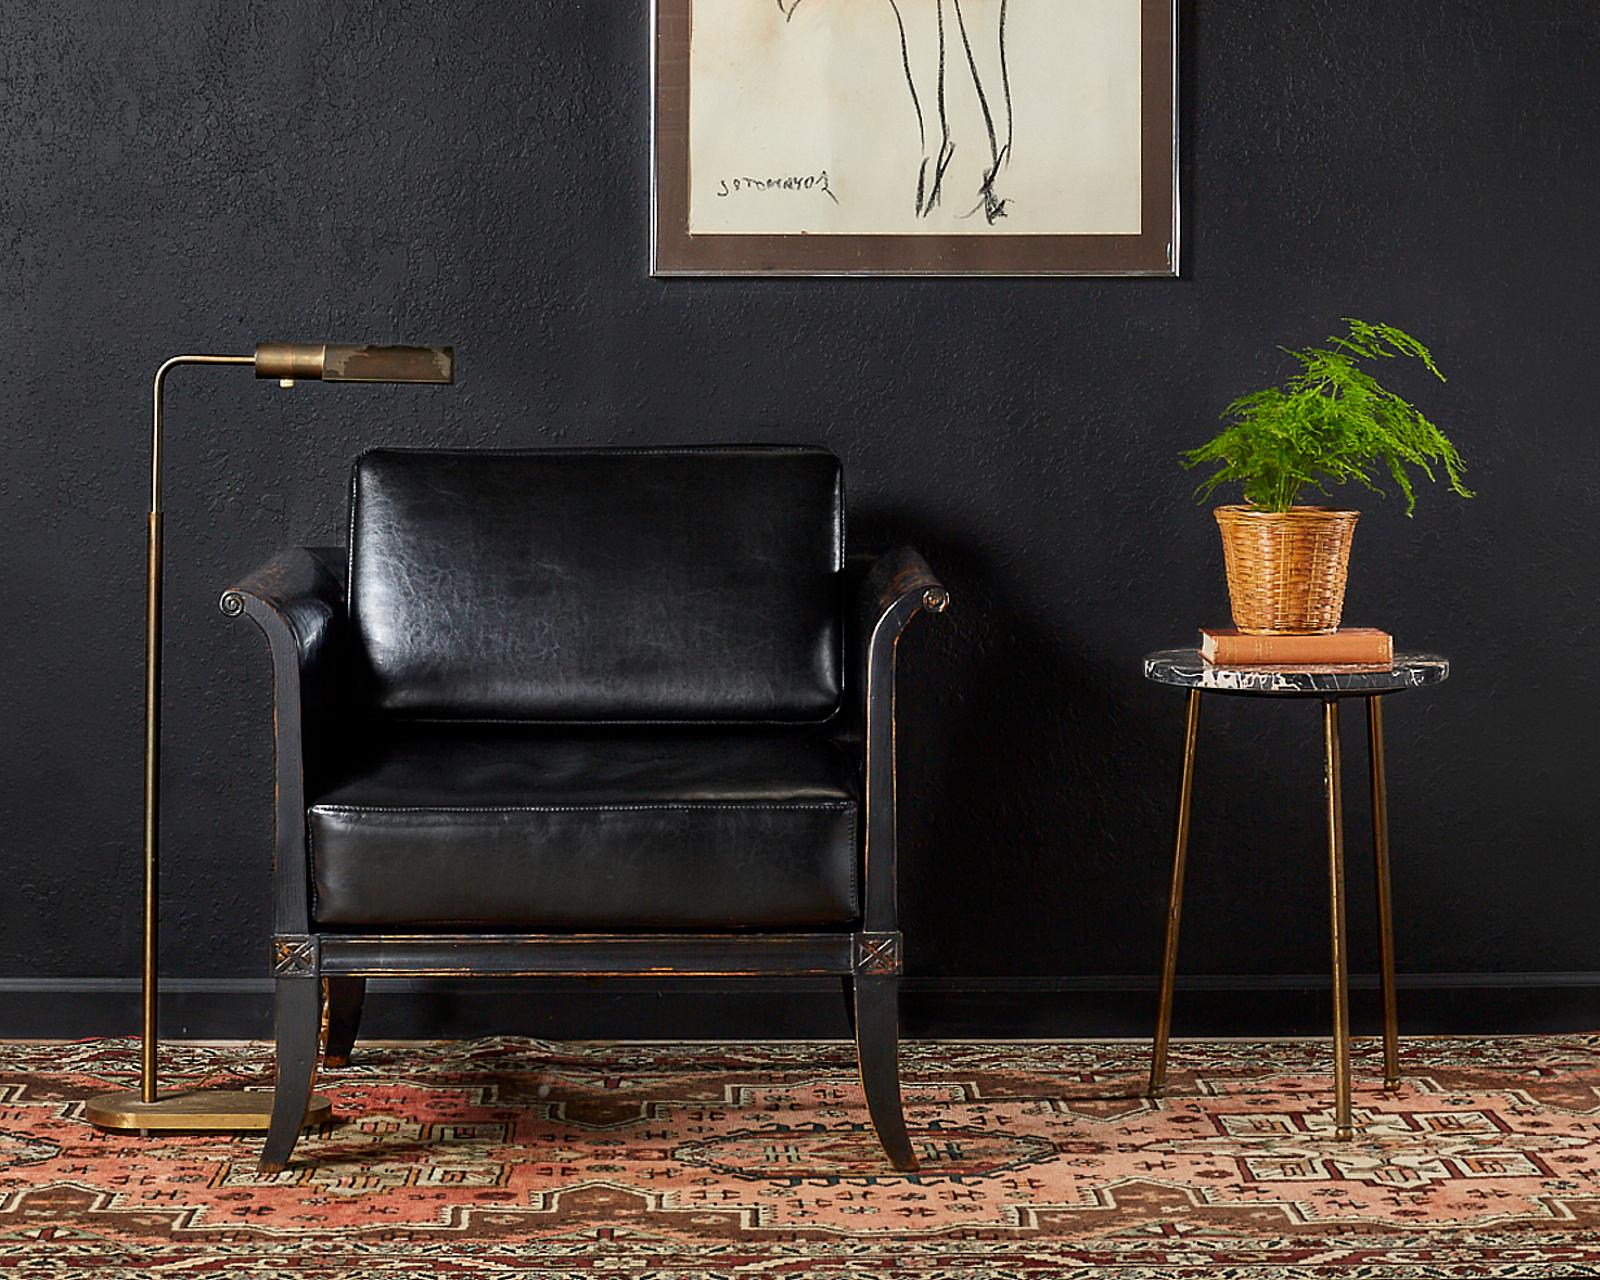 Dramatic pair of oak lacquered cube chairs, or tub chairs made in the neoclassical taste. The lounge chairs feature an intentionally distressed black lacquer finish with a low sleek profile. The arms and back have scrolled ends and the seat is